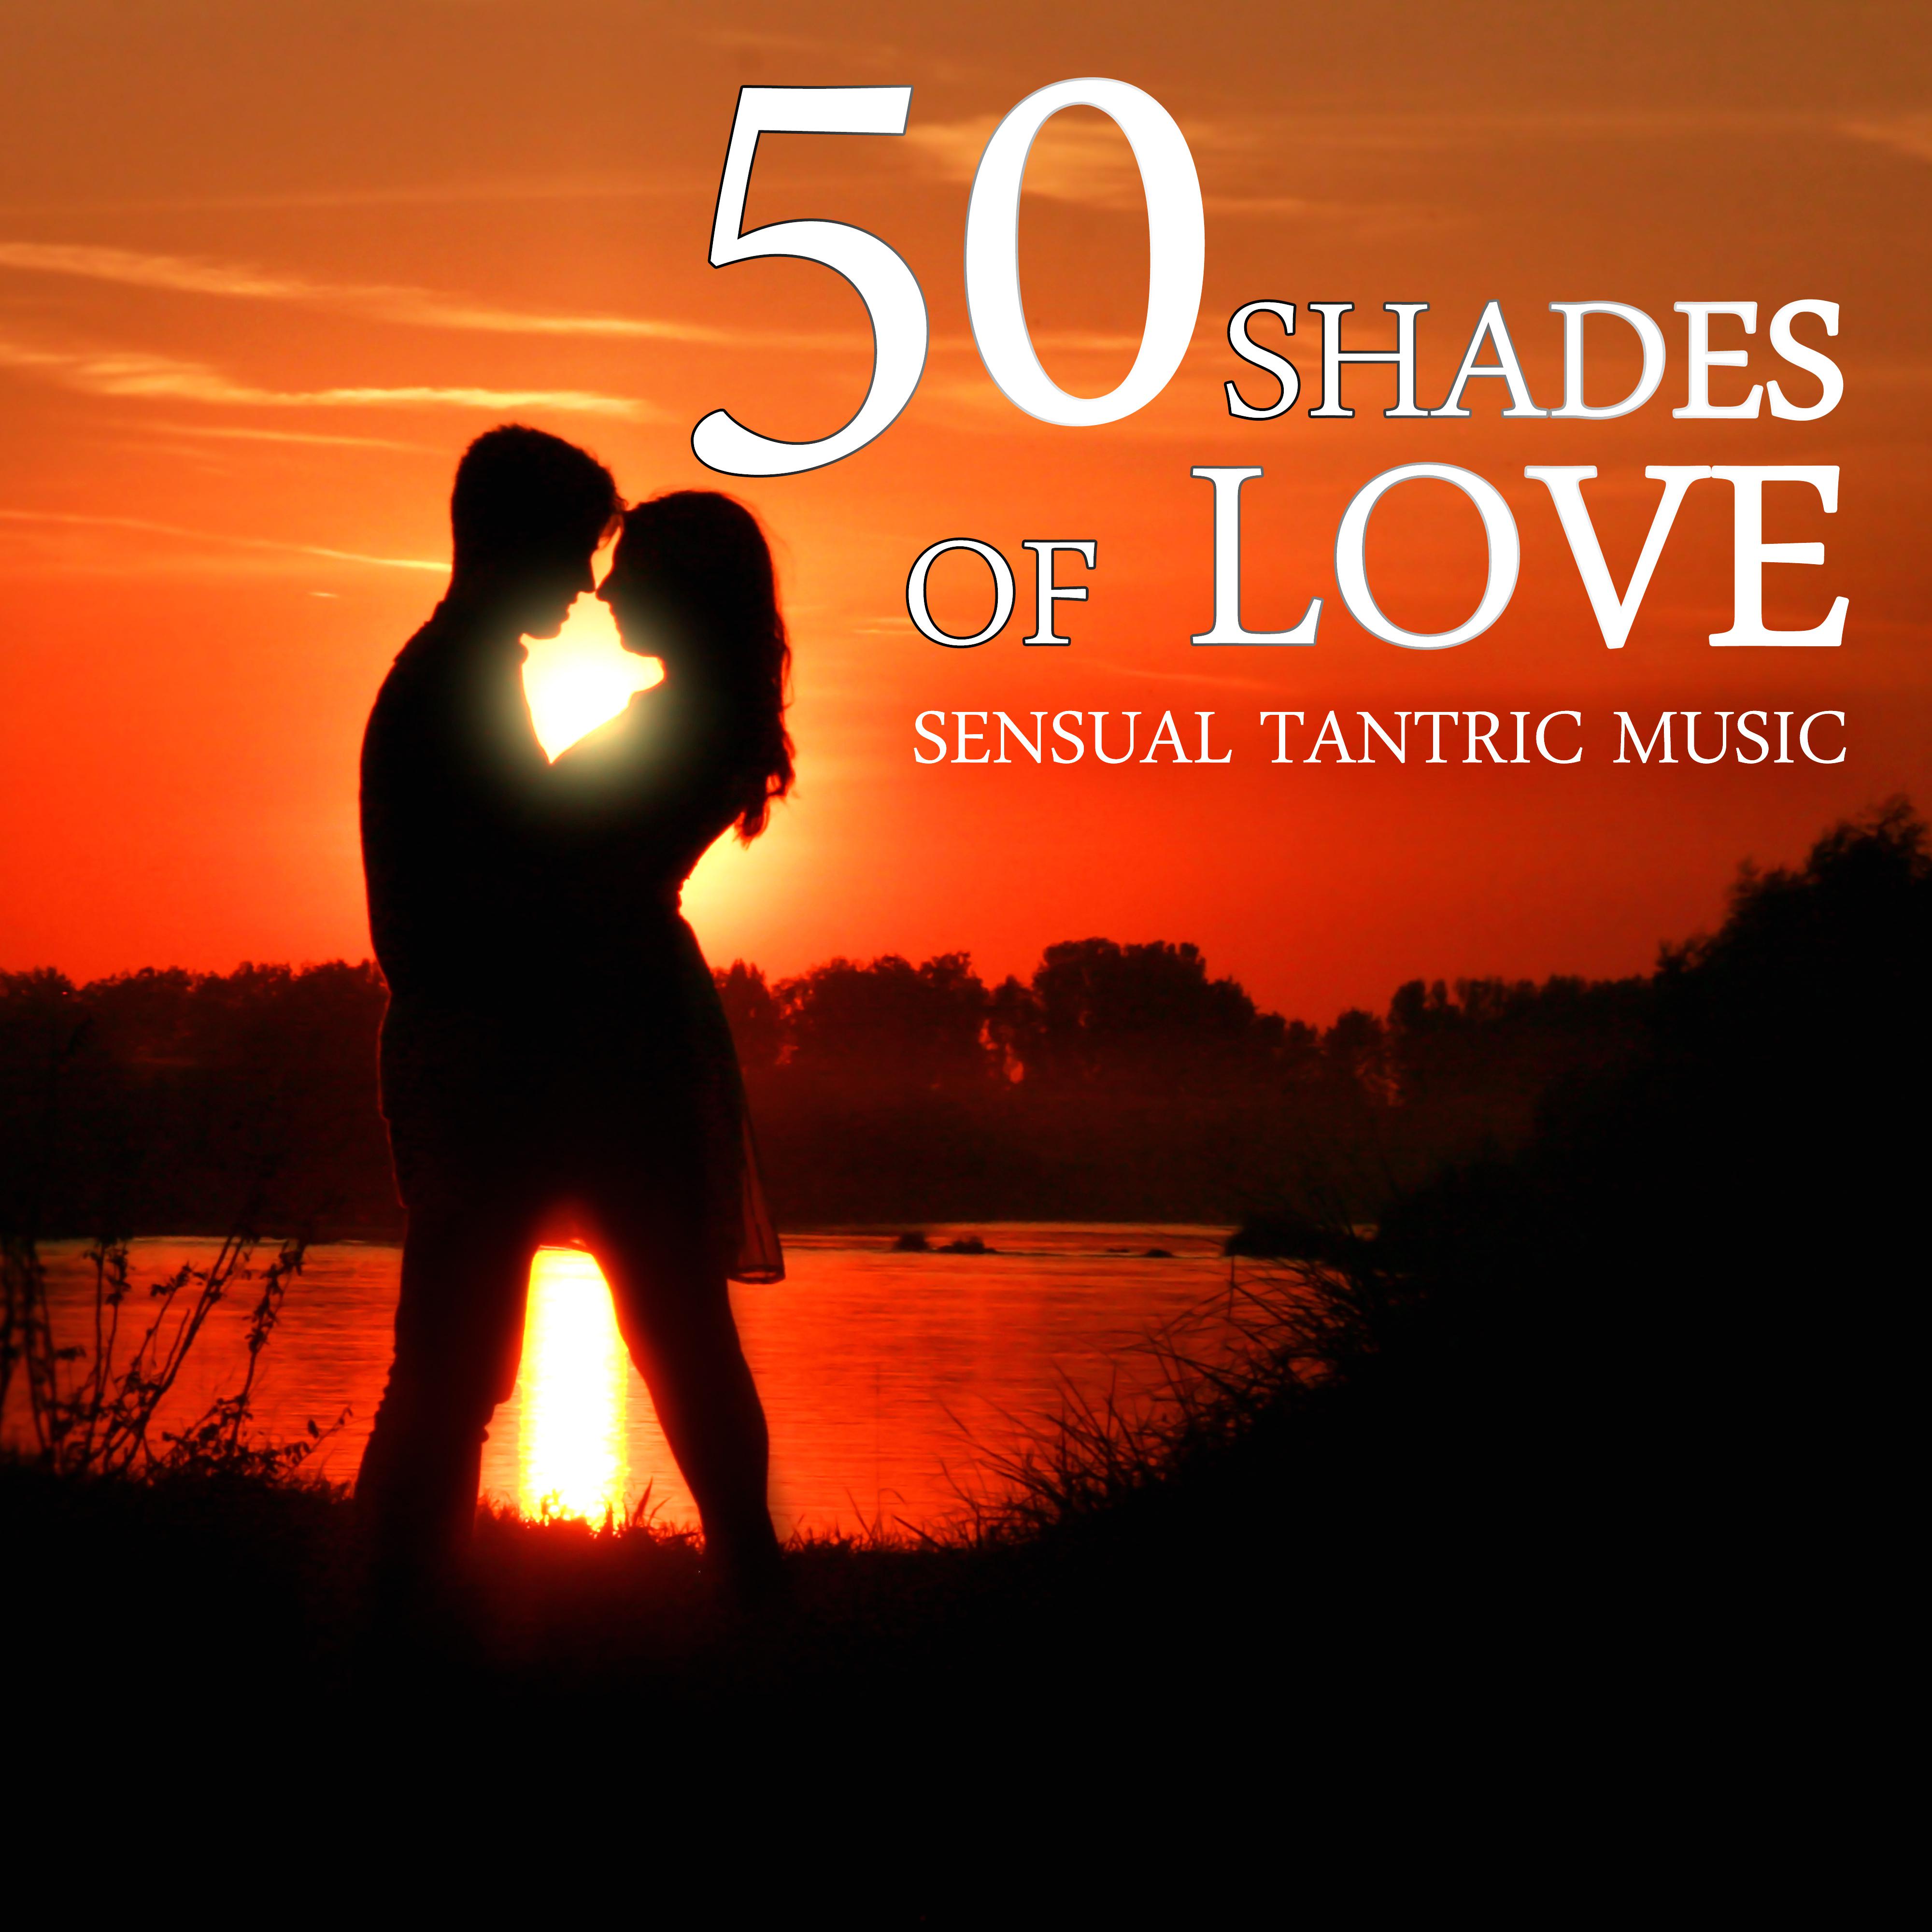 50 Shades of Love  Sensual Tantric Music  Emotional Love Songs, Smooth Jazz Piano, Erotic Massage Before Making Love, New Age Music for Relaxation, Sex Soundtrack, Shades of Grey